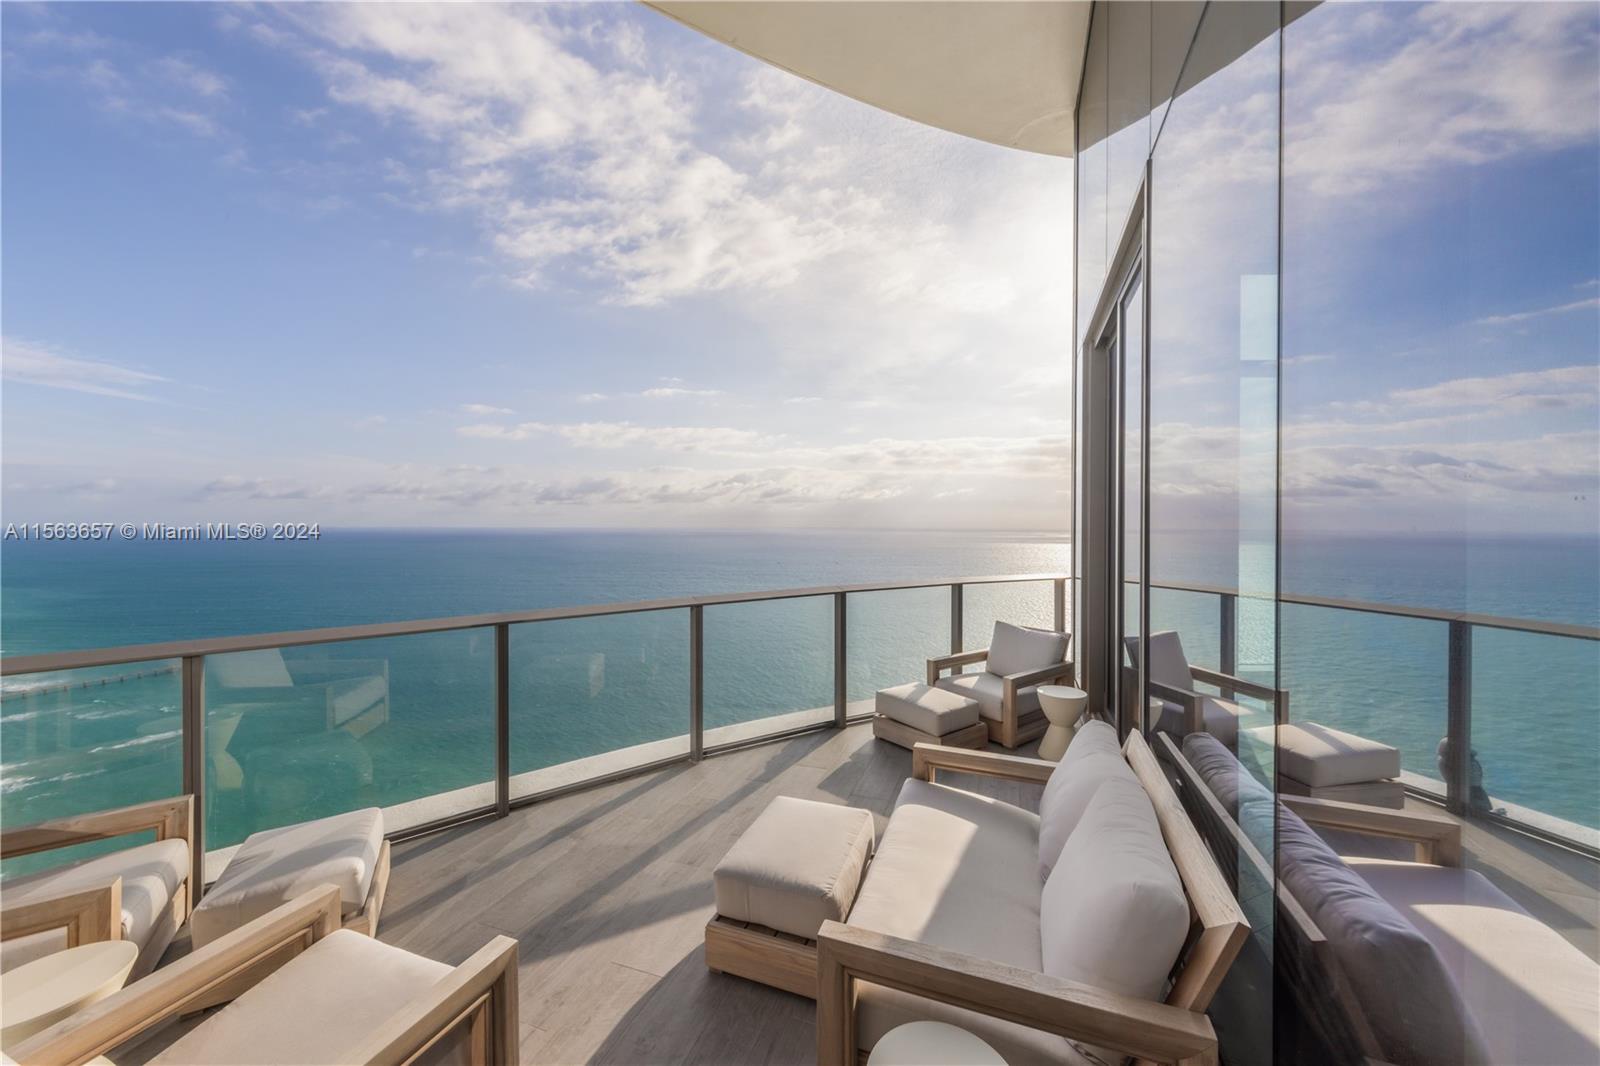 Junior Penthouse at Ritz-Carlton Sunny Isles.  Experience unparalleled luxury in this exquisite architect gut-renovated 3 BR + den, 4.5 BA residence on the 48th floor with 14ft cathedral ceilings. Approx. 3,000 sqft of meticulously designed living space with two large private terraces. Enjoy ocean views from sunrise to sunset through grand floor-to-ceiling windows. Impeccable details include custom millwork, white oak herringbone wood floors, imported marbles & Gaggenau appliances. As previously marketed- in addition to the residence, unit can come fully furnished including a brand new hardly used Bentley Continental GT V8. The Ritz-Carlton Residences Sunny Isles offers world-class amenities including beach access, swimming pools, oceanfront gym, spa, theatre, lounge, fine dining options.